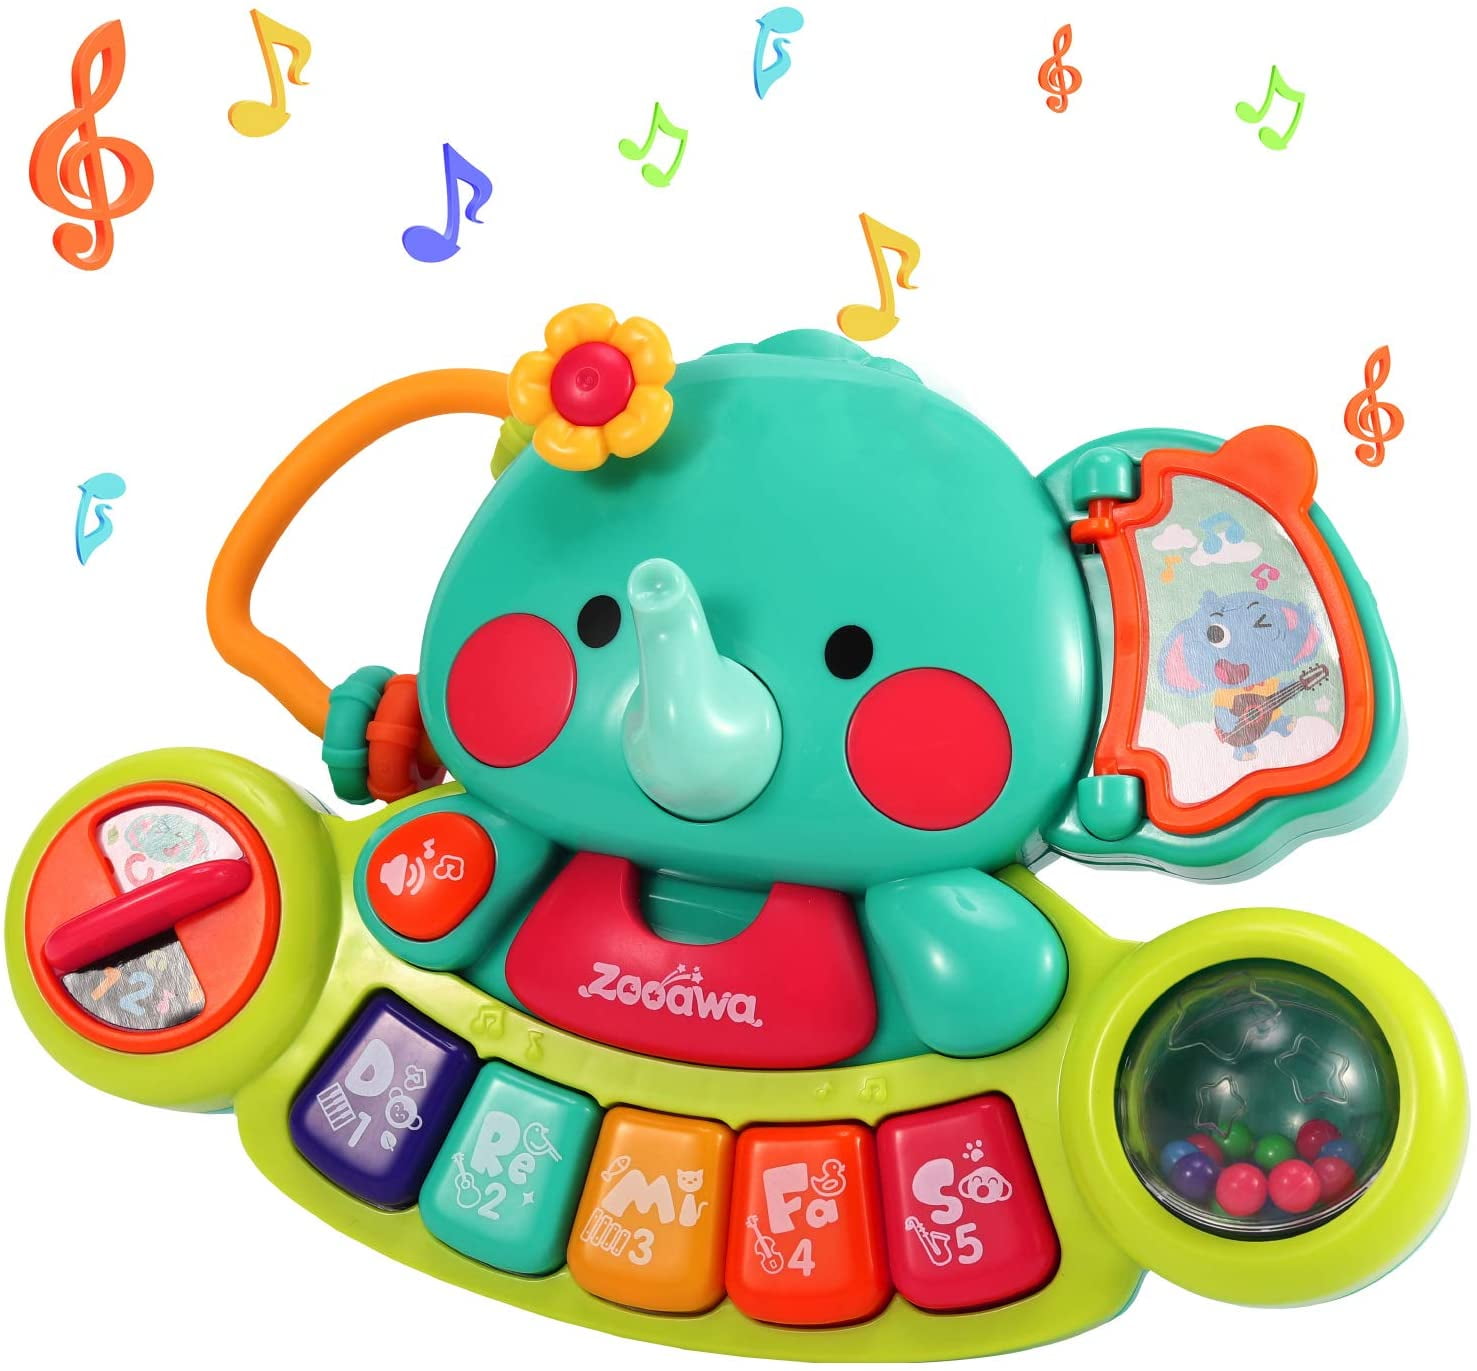 Baby Musical Elephant Toys Toddlers Music Learning Toy Piano Keyboard with Lights and Sound a Early Education Toy Gift for 6 Months Up Newborn Boys Girls 